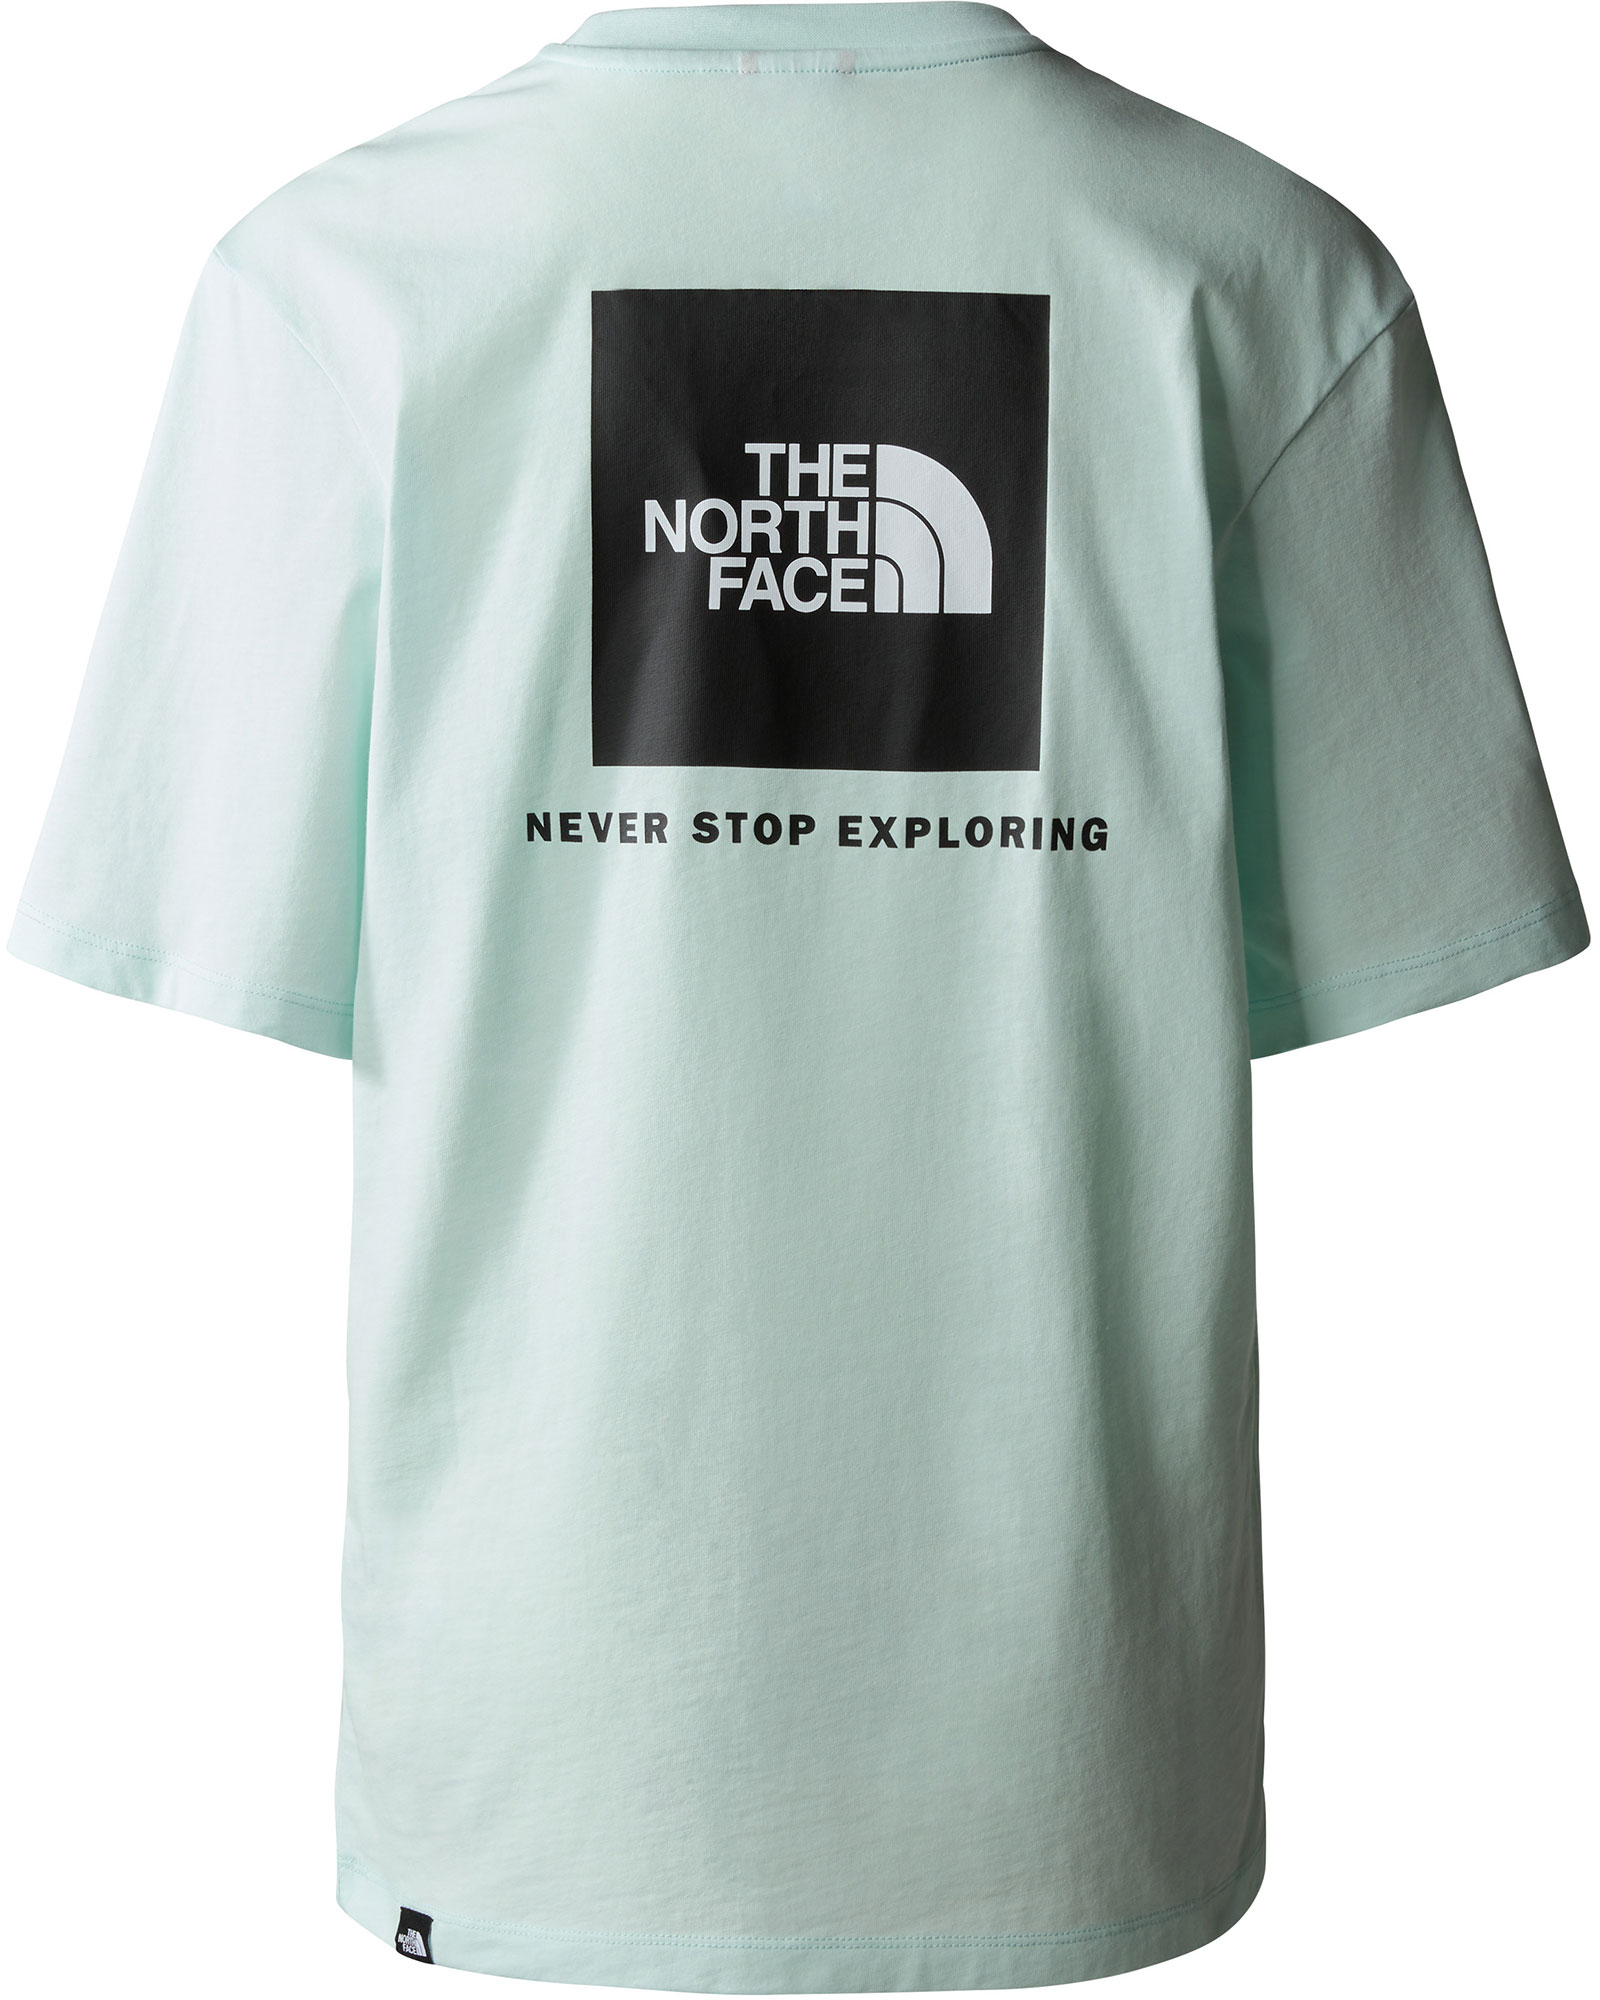 The North Face Relaxed Redbox Women’s T Shirt - Skylight Blue L